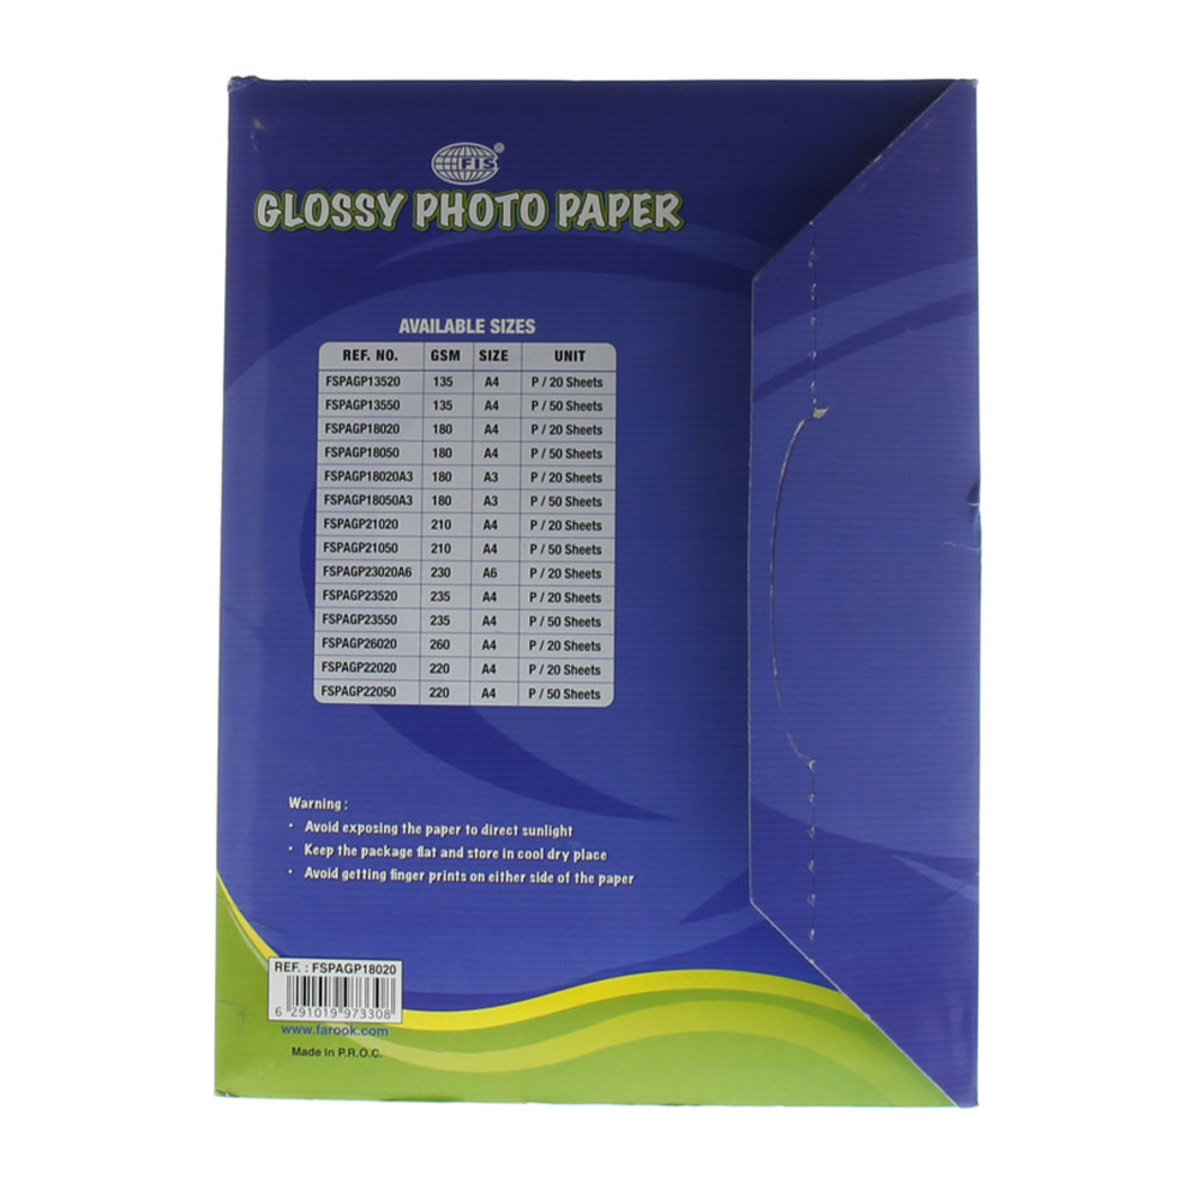 Fis Glossy Photo Paper 180 gsm 20 Sheet